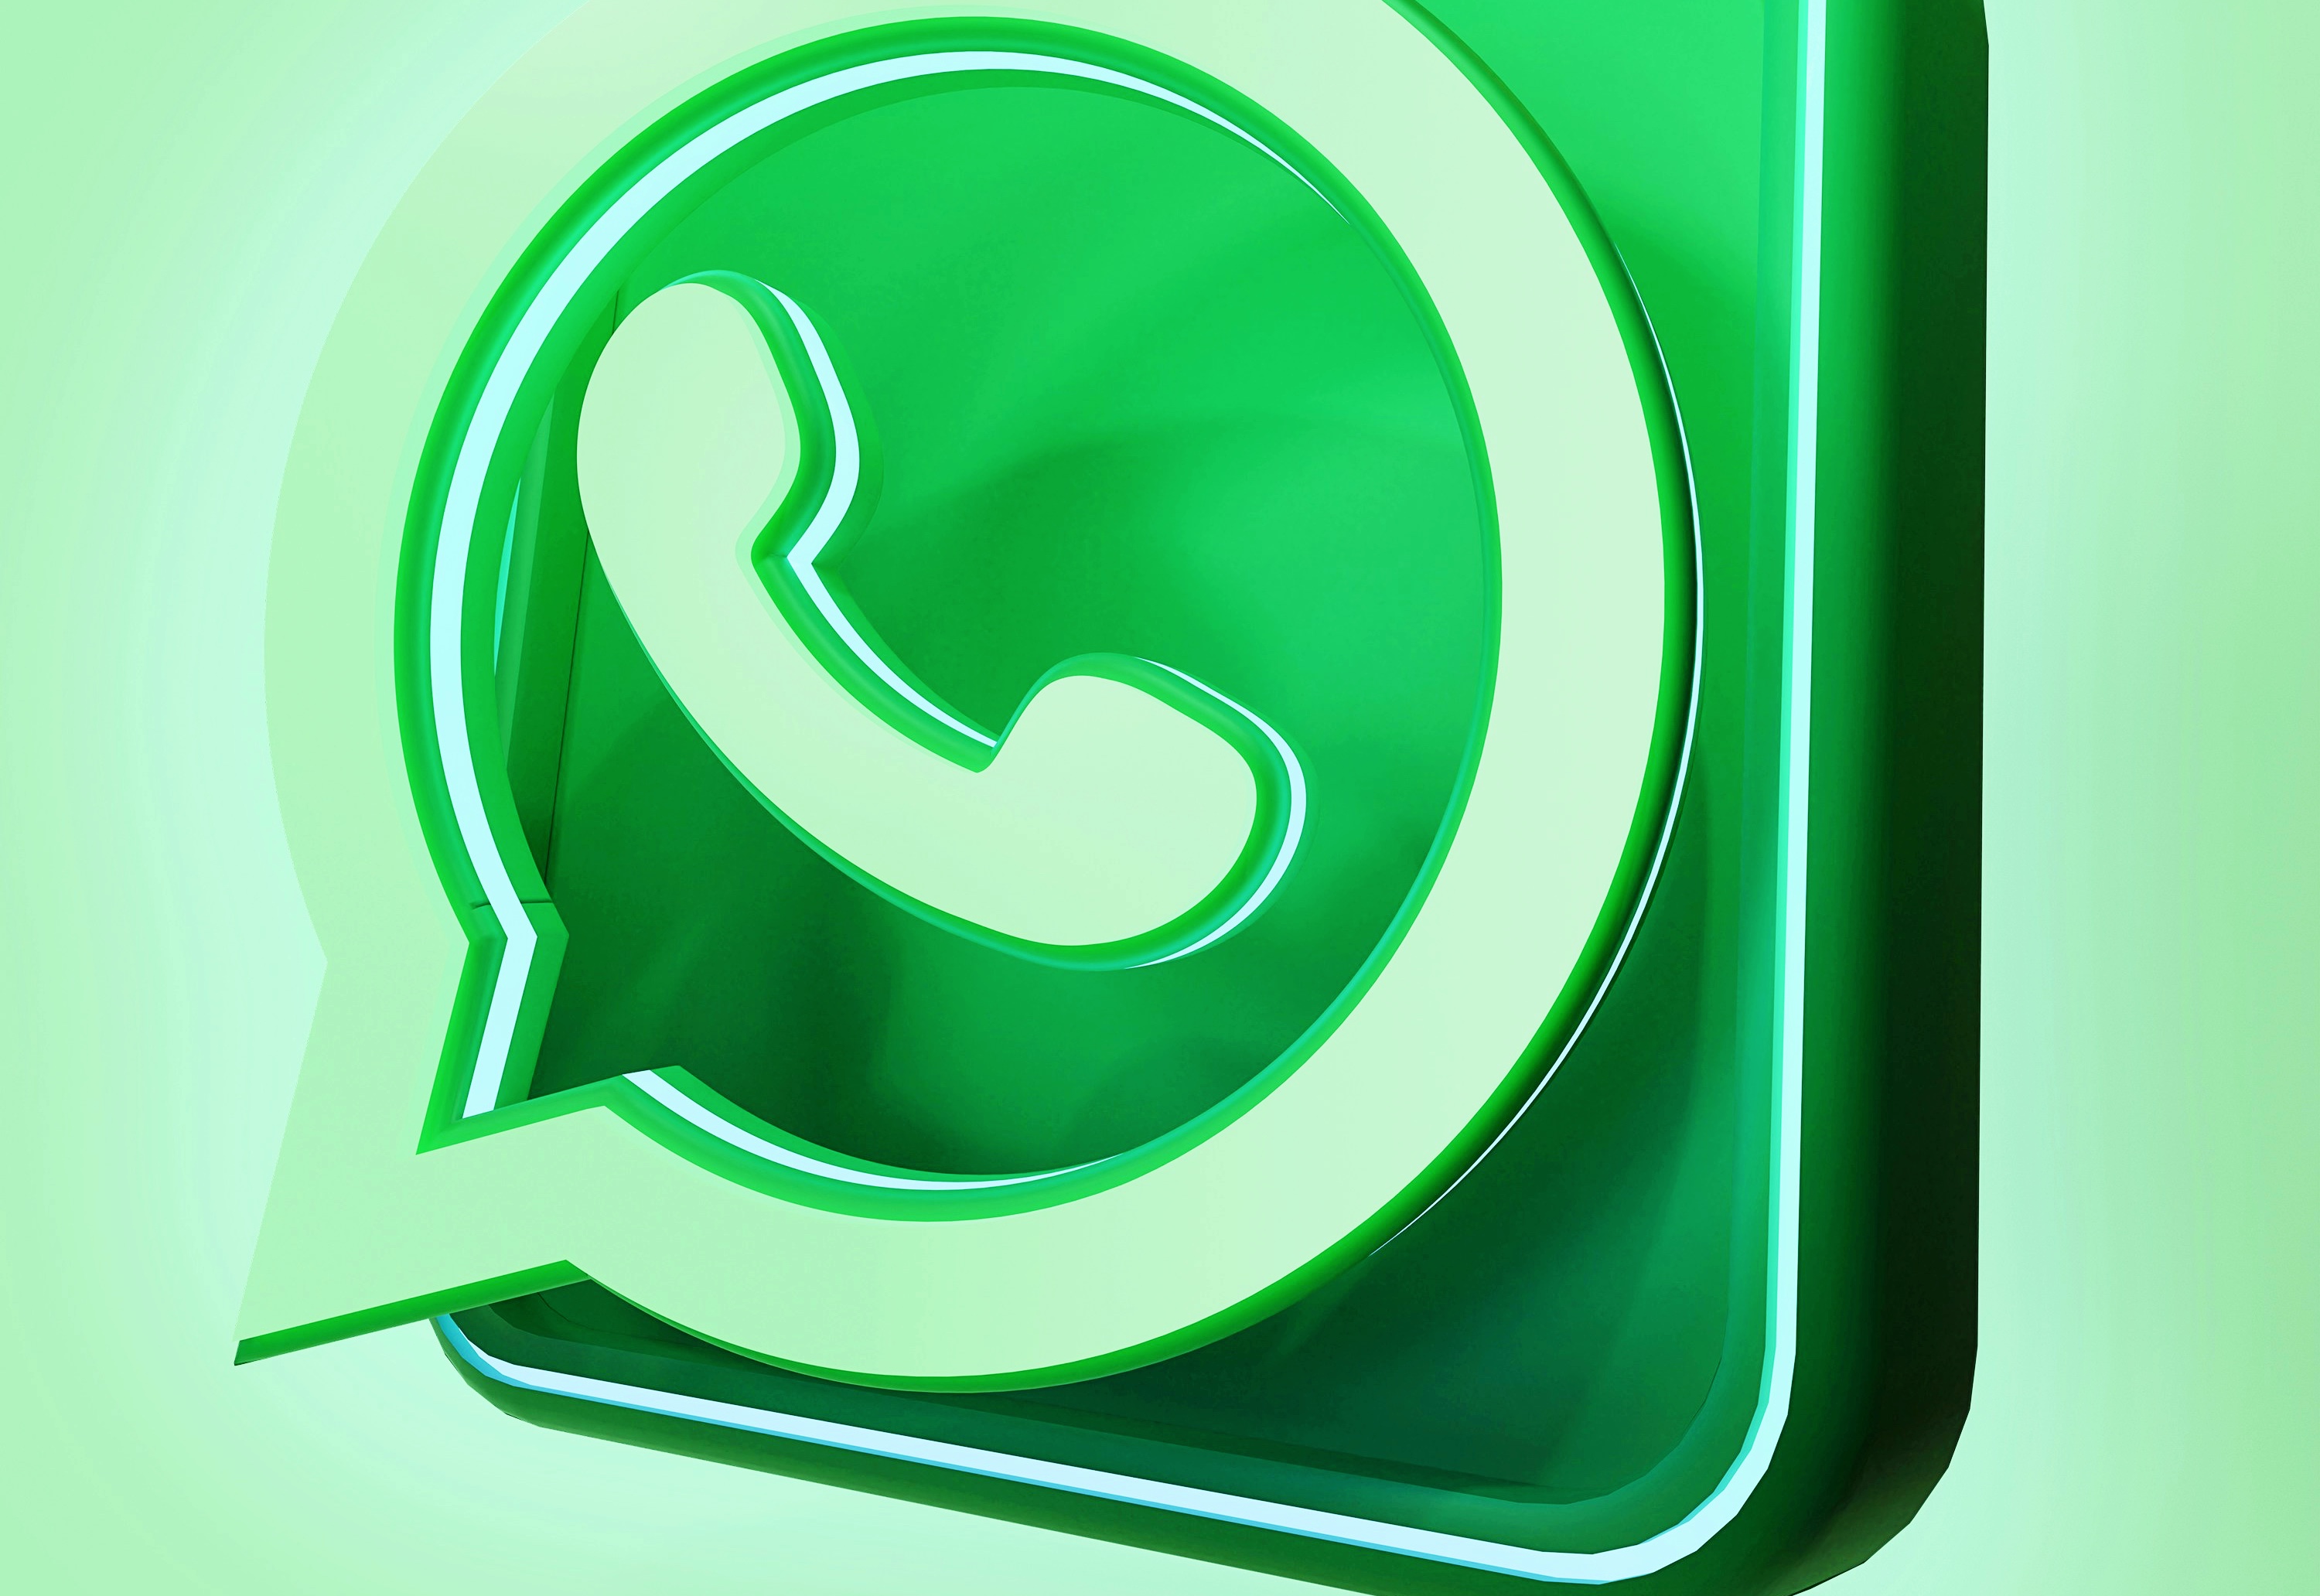 This amazing AI feature is coming to WhatsApp